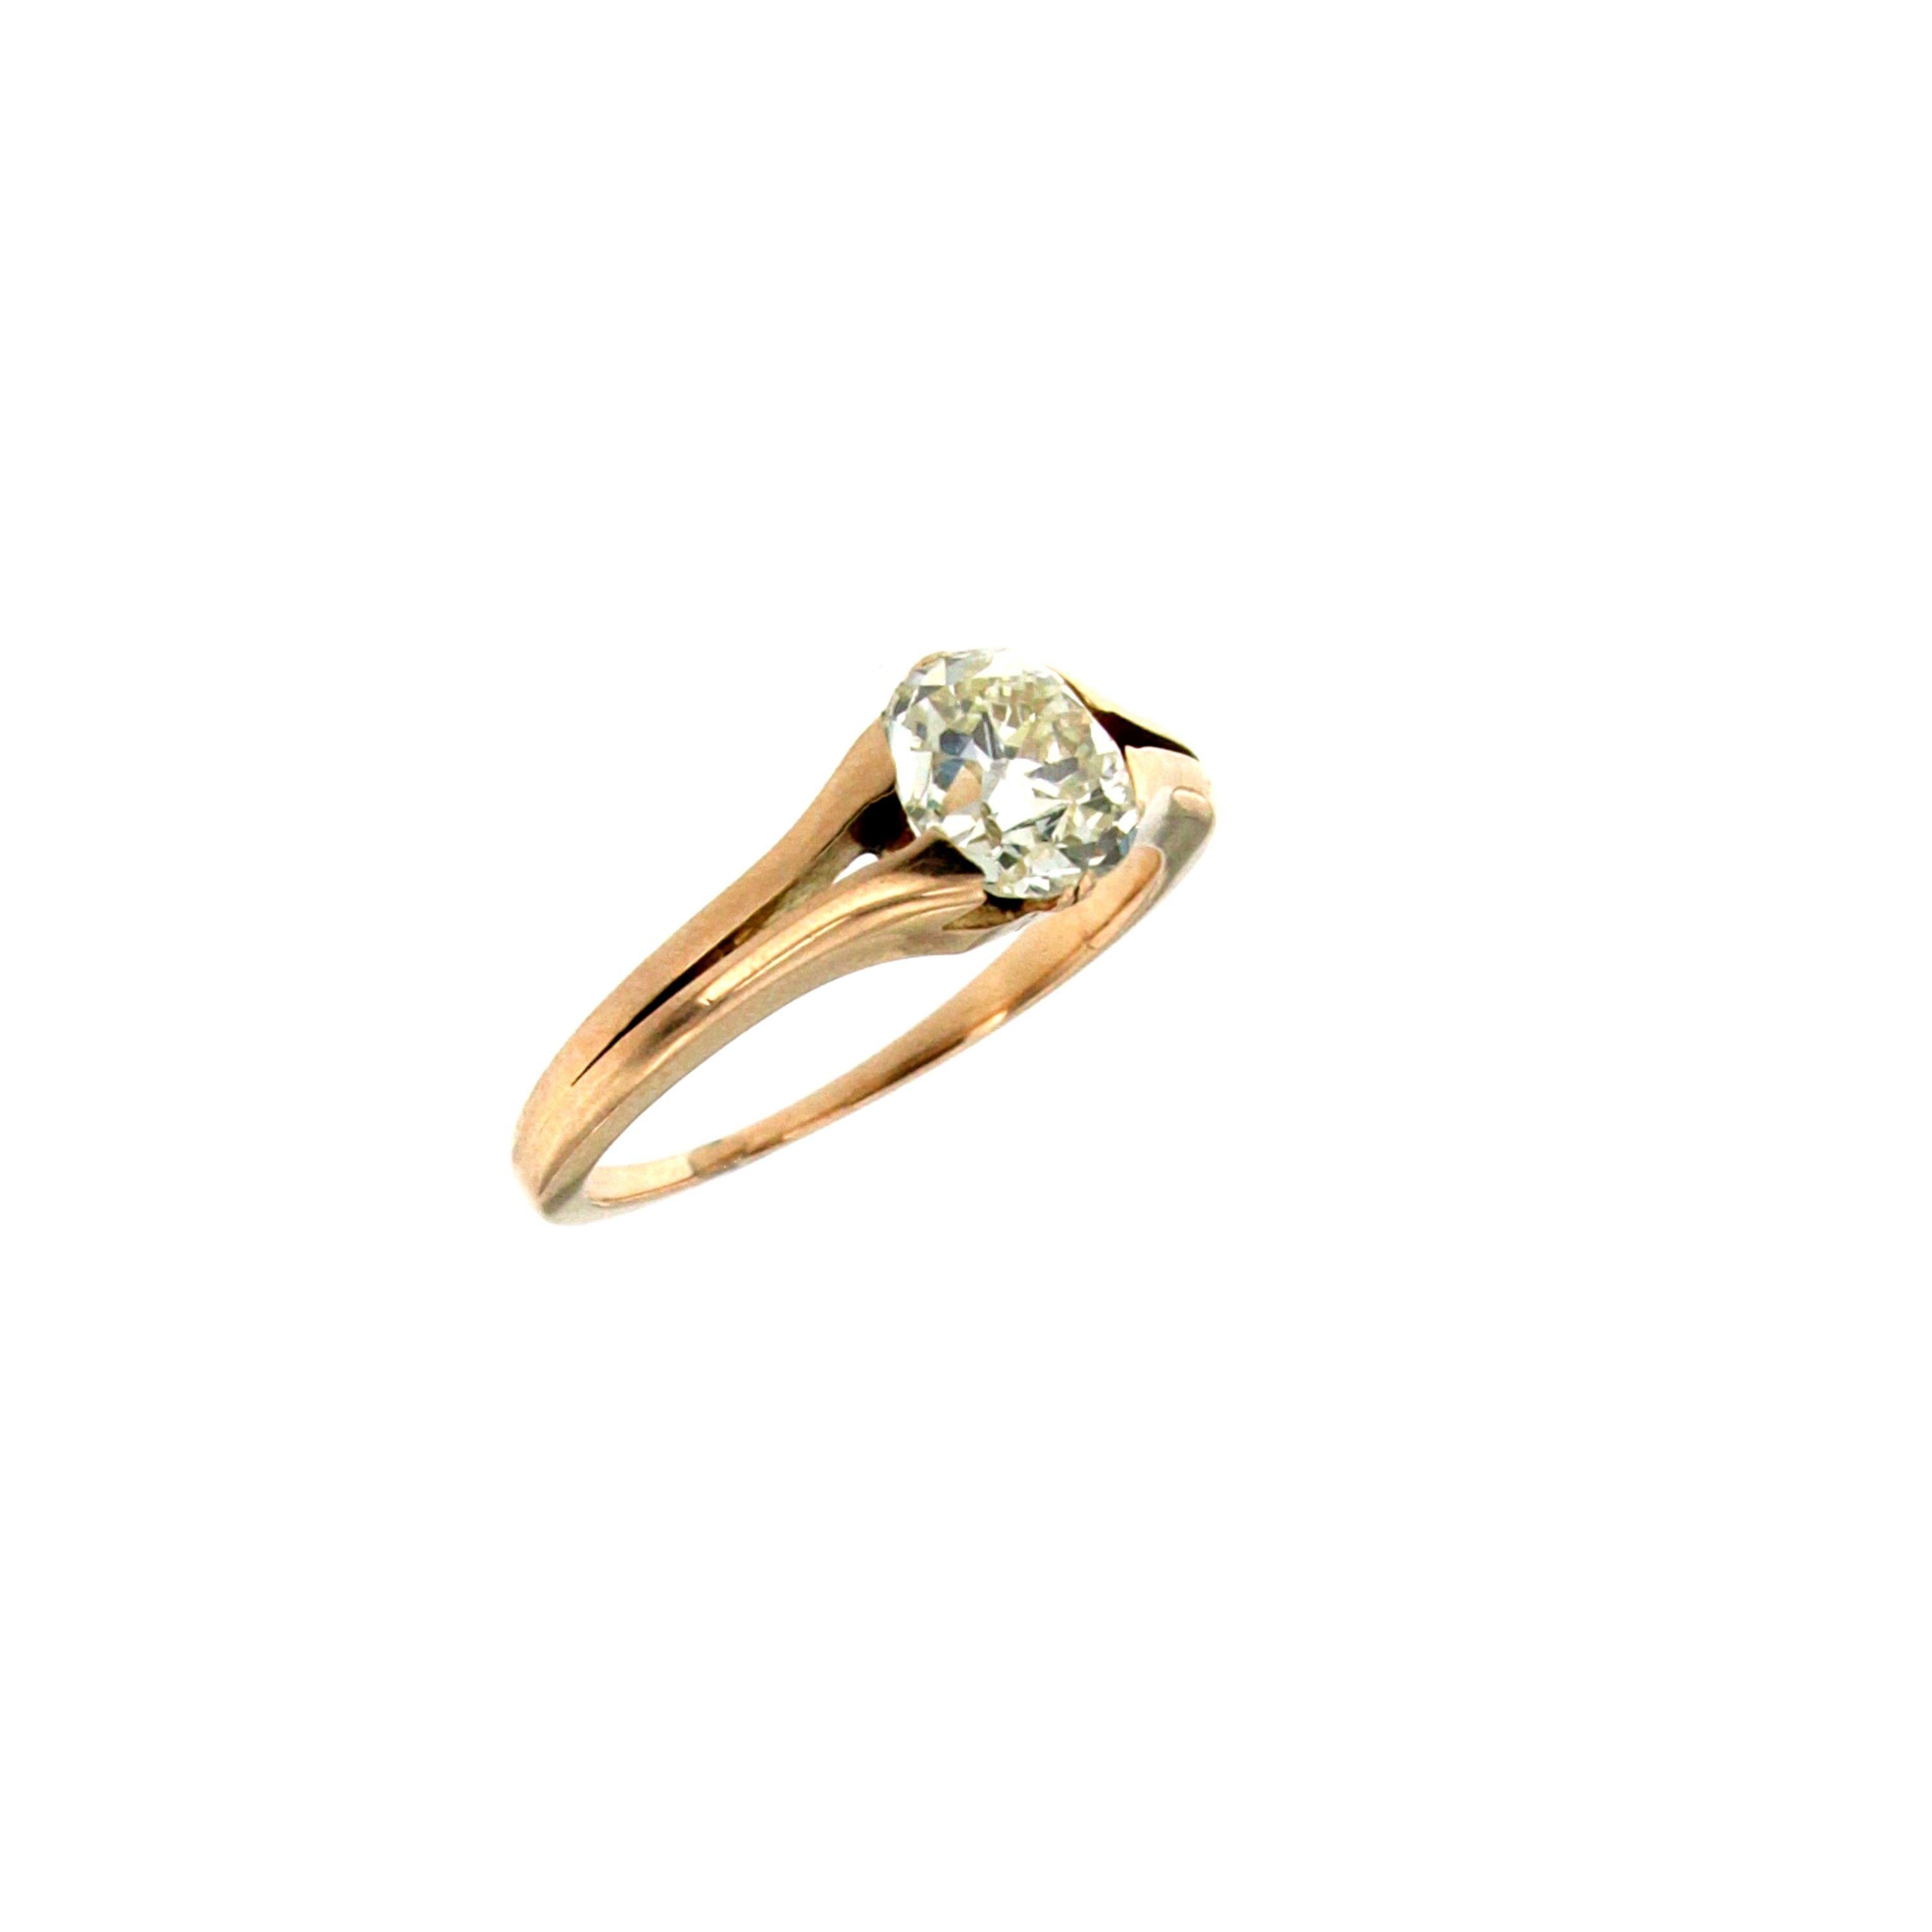 Simple and Beautiful unisex ring made of 18k rose Gold, made in Italy circa 1950.

It is set with one full of charme sparkling old mine cut Diamond of 1,70 carat Graded I/J color Si clarity.

CONDITION: Pre-Owned - Excellent 
METAL: 18k Gold
GEM